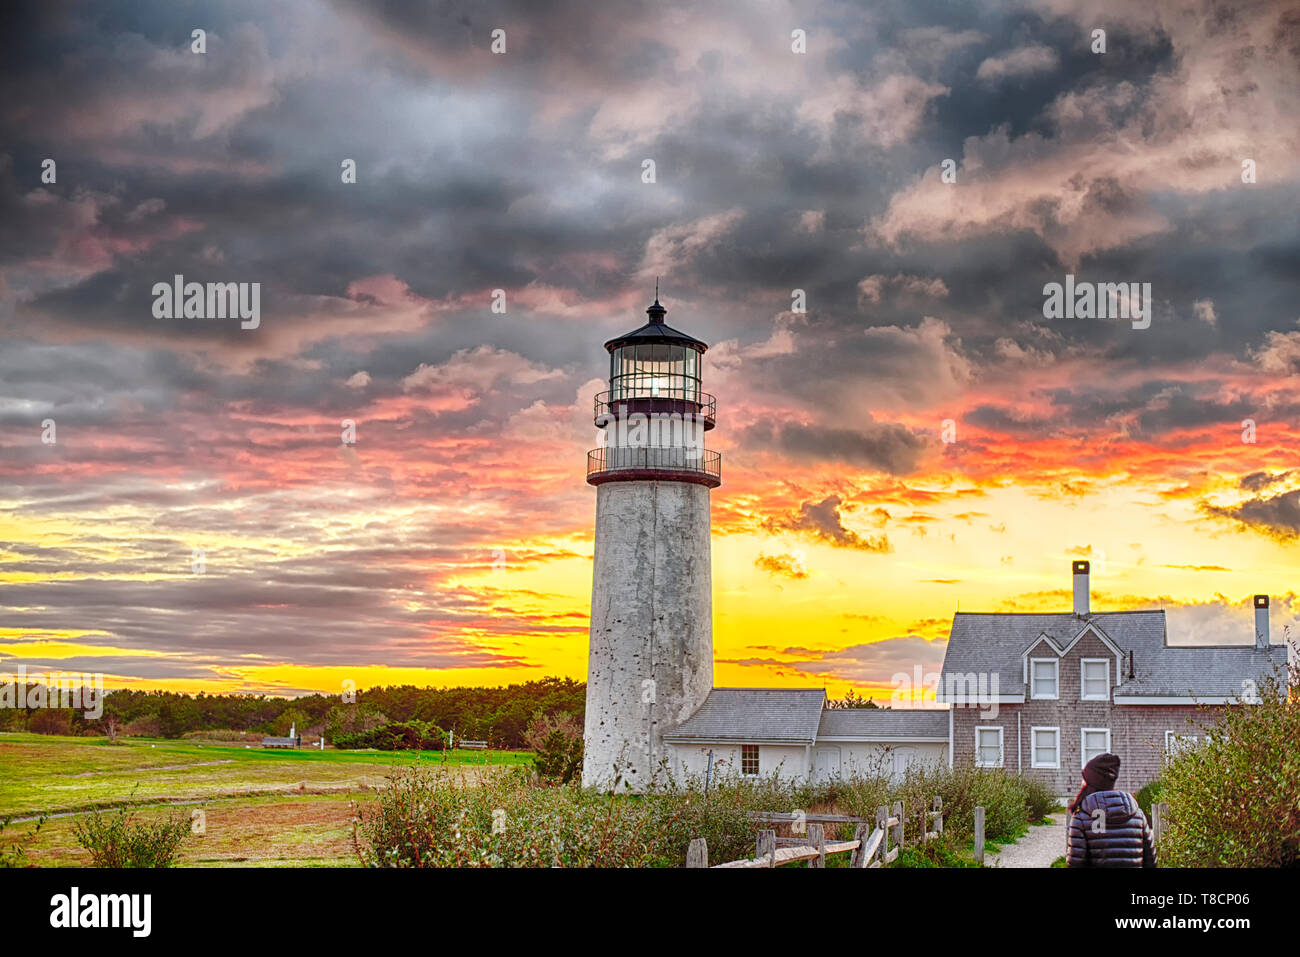 The Highland Lighthouse against a beautiful dramatic sunset in North Truro Massachusetts on the Cape Cod National Seashore. Stock Photo